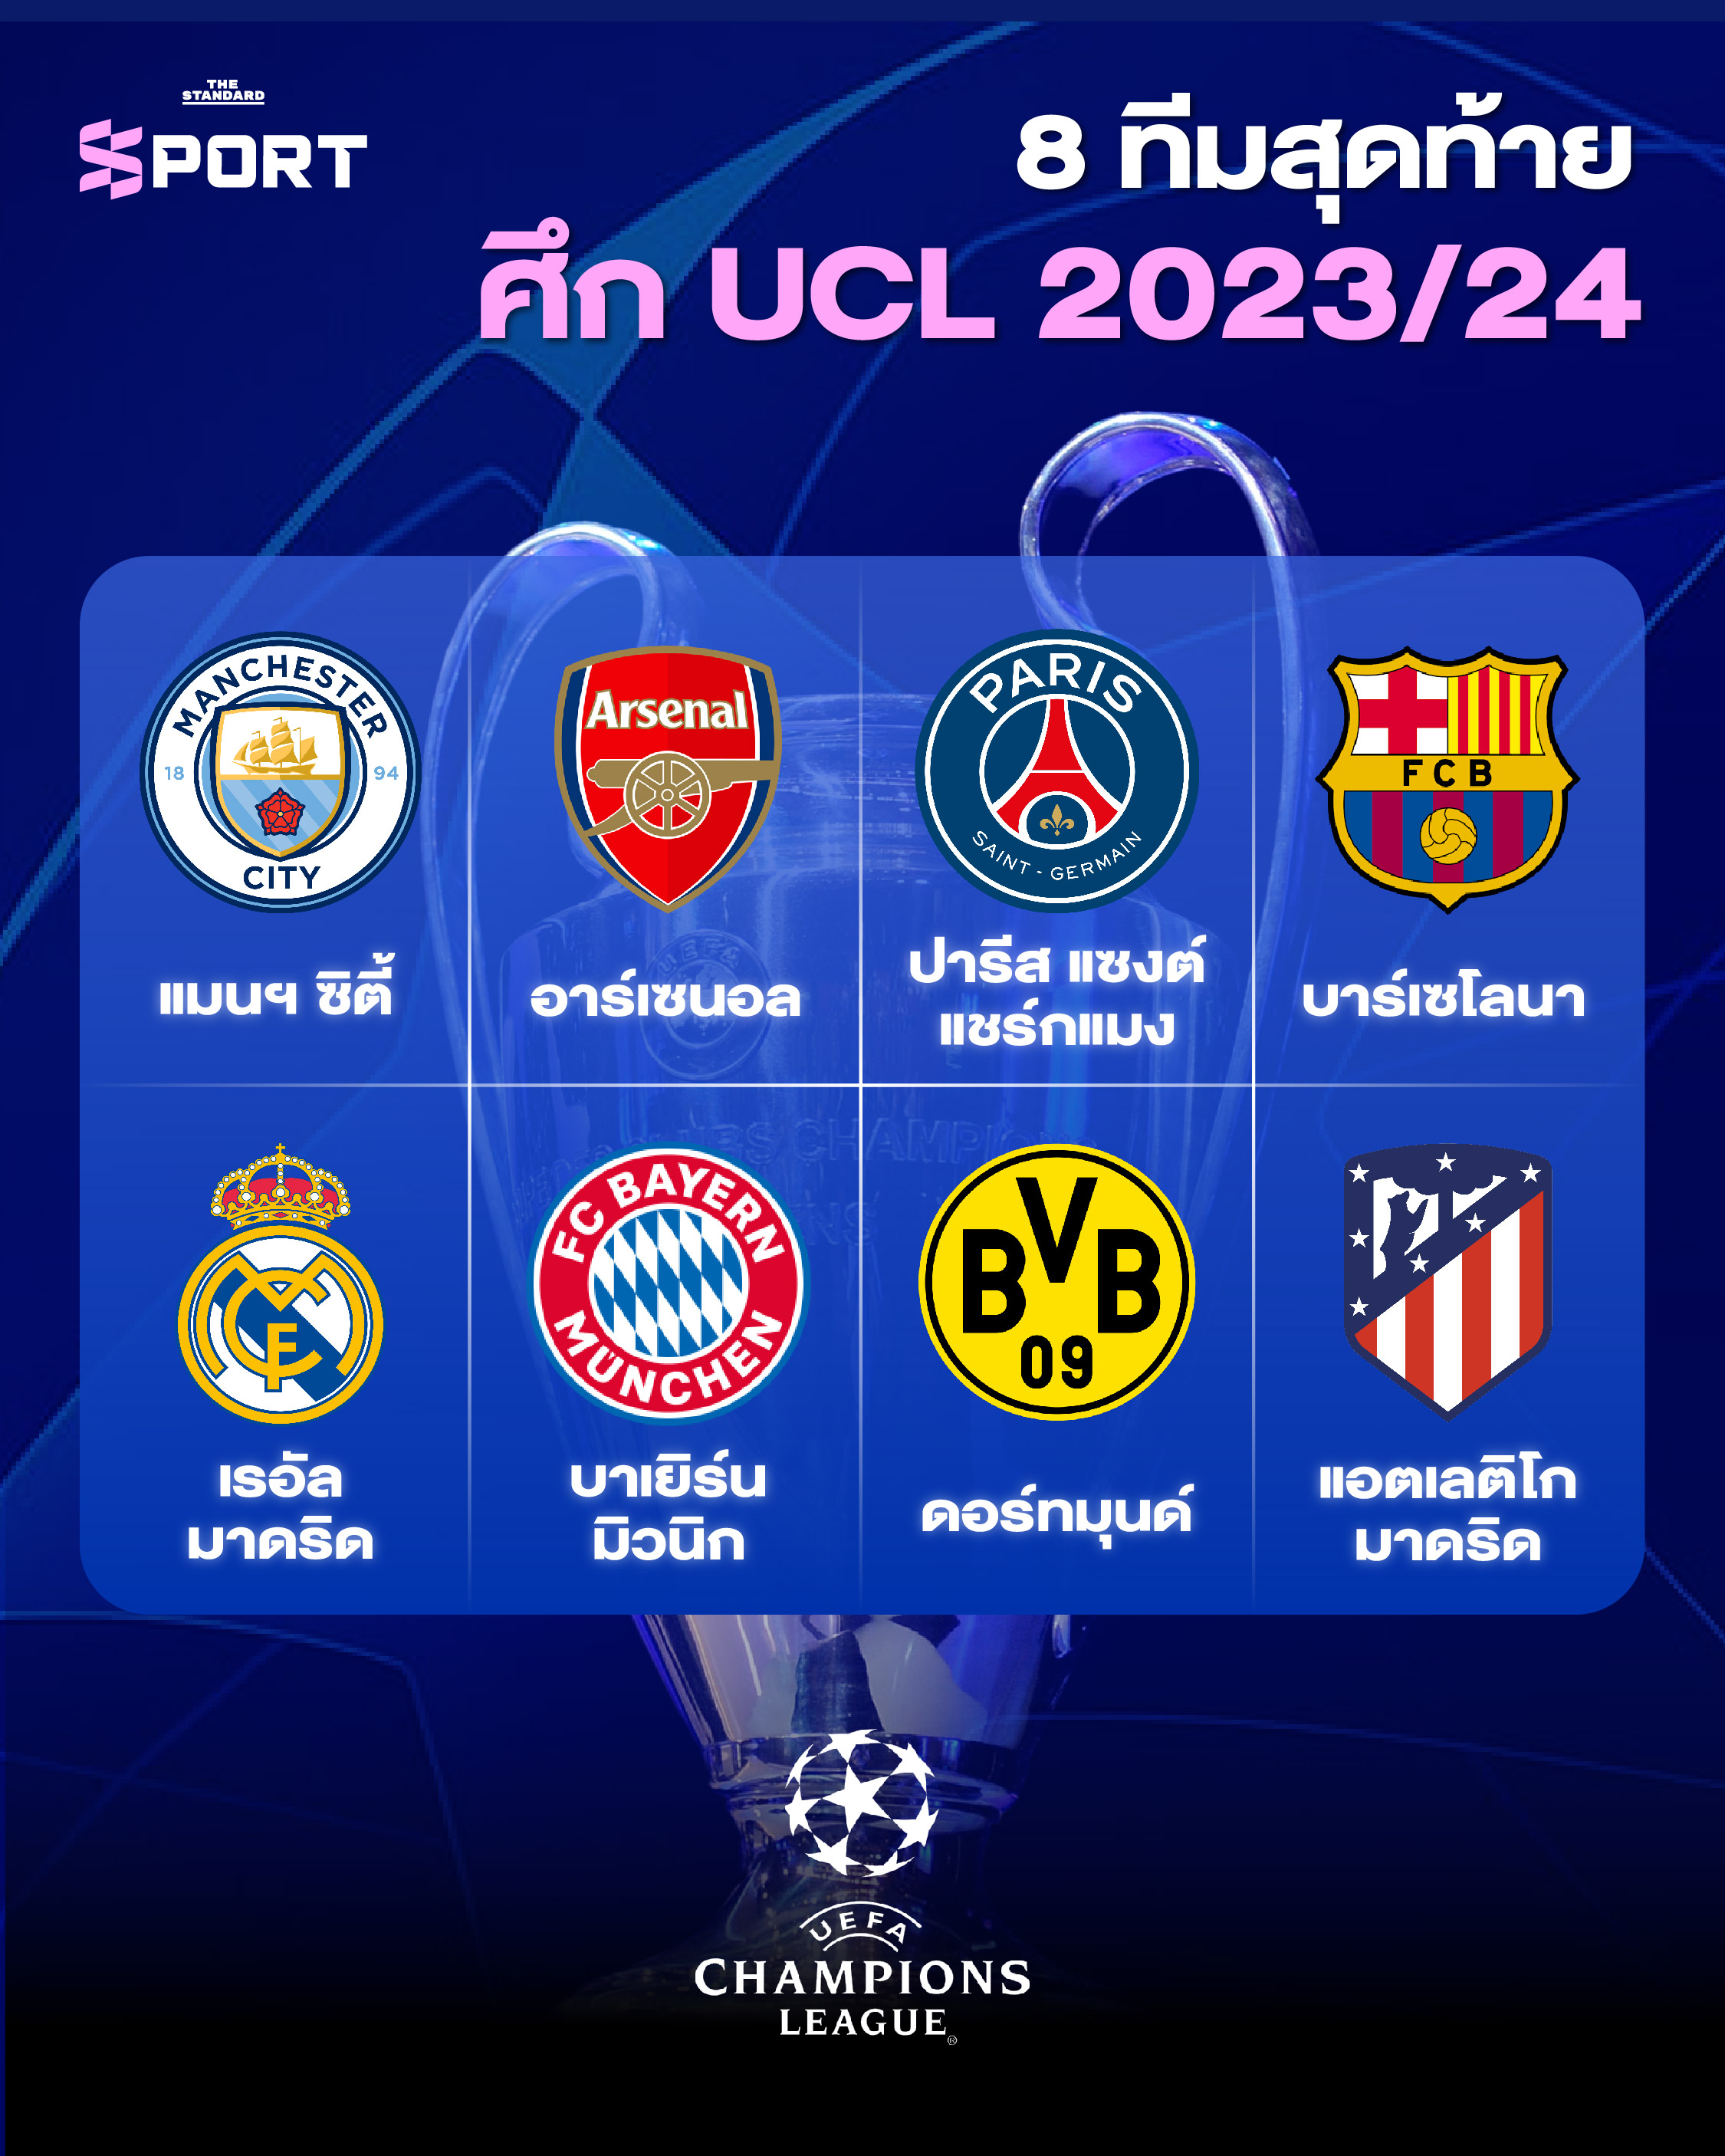 UCL 2023/24